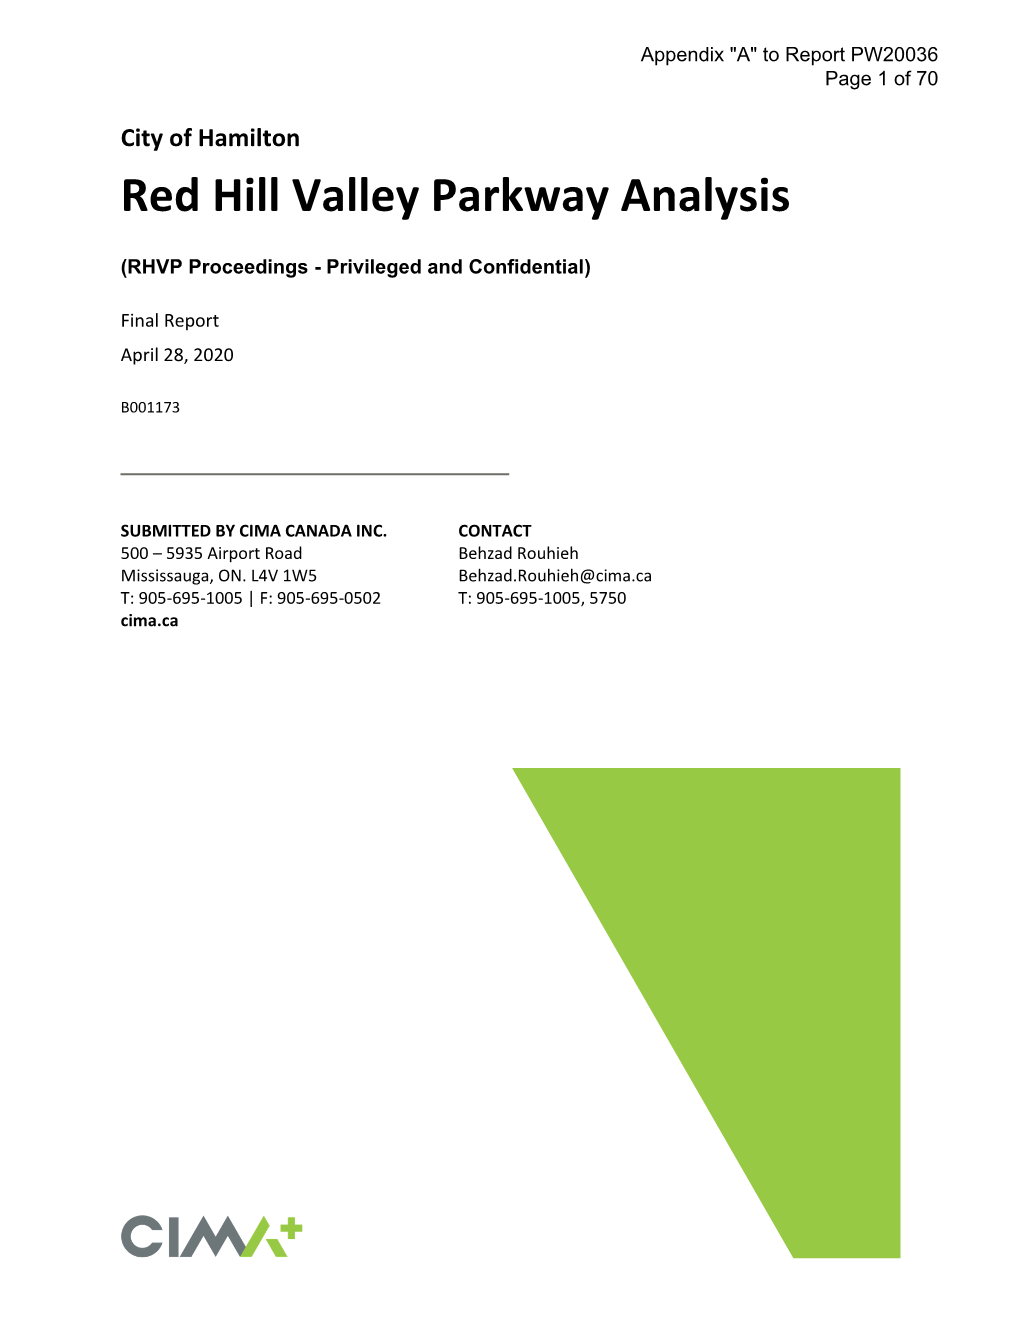 Red Hill Valley Parkway Analysis